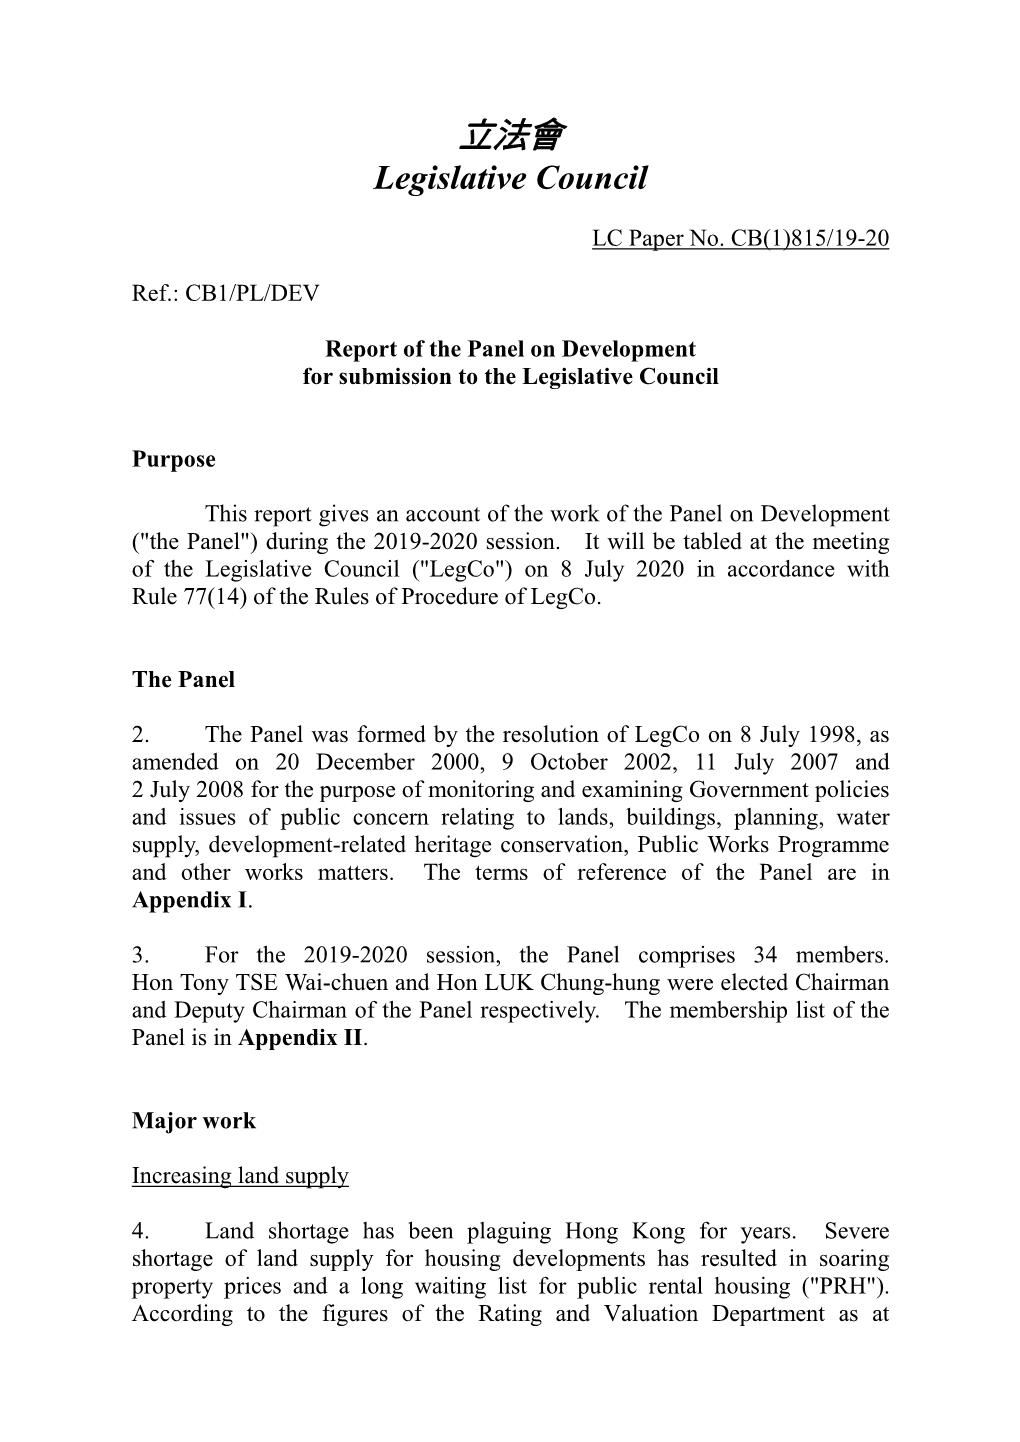 Report of the Panel on Development to the Legislative Council on 8 July 2020